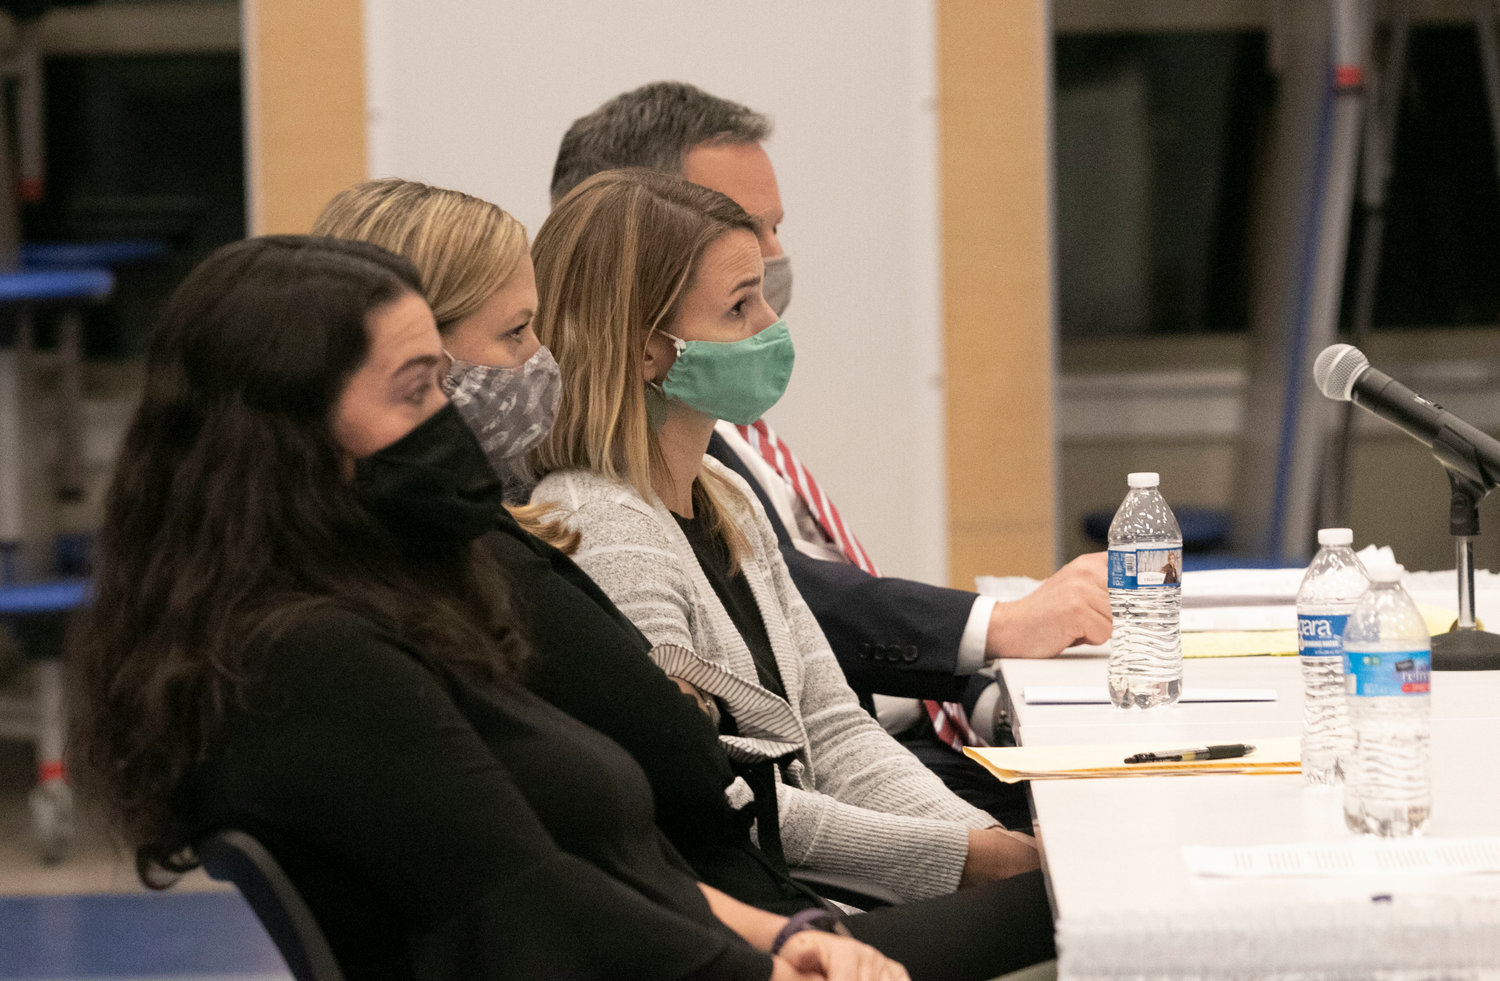 Barrington teachers Kerri Thurber, Brittany DiOrio, and Stephanie Hines (from left to right) sit with their attorney, Greg Piccirilli during Thursday night's pre-termination hearing.